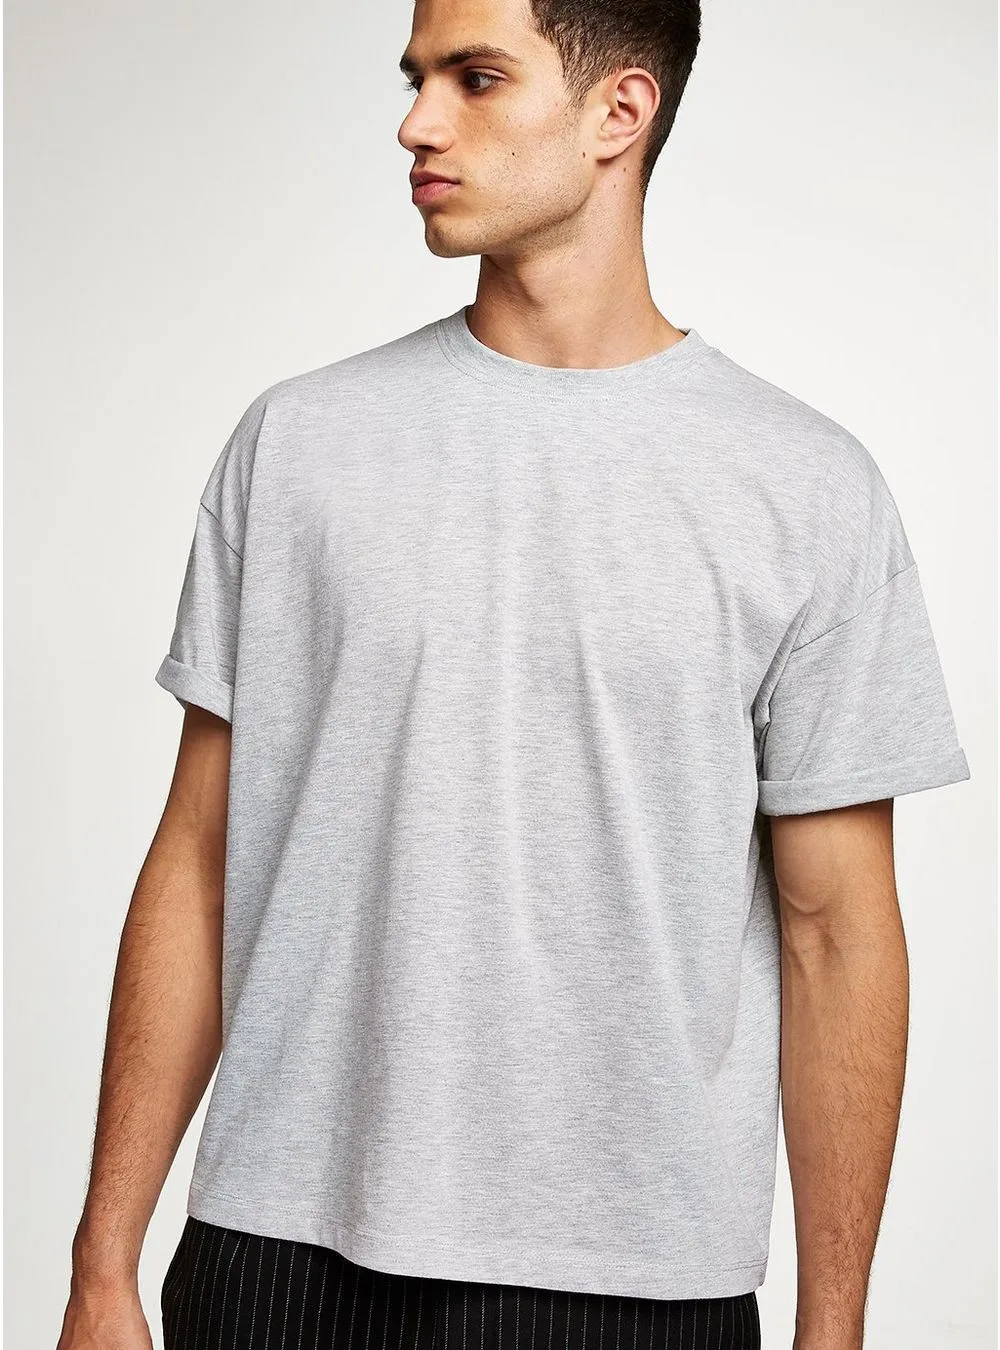 Boxy Fit Blank Tee Shirts T Shirts In Bulk - Buy Boxy Fit Blank Tee